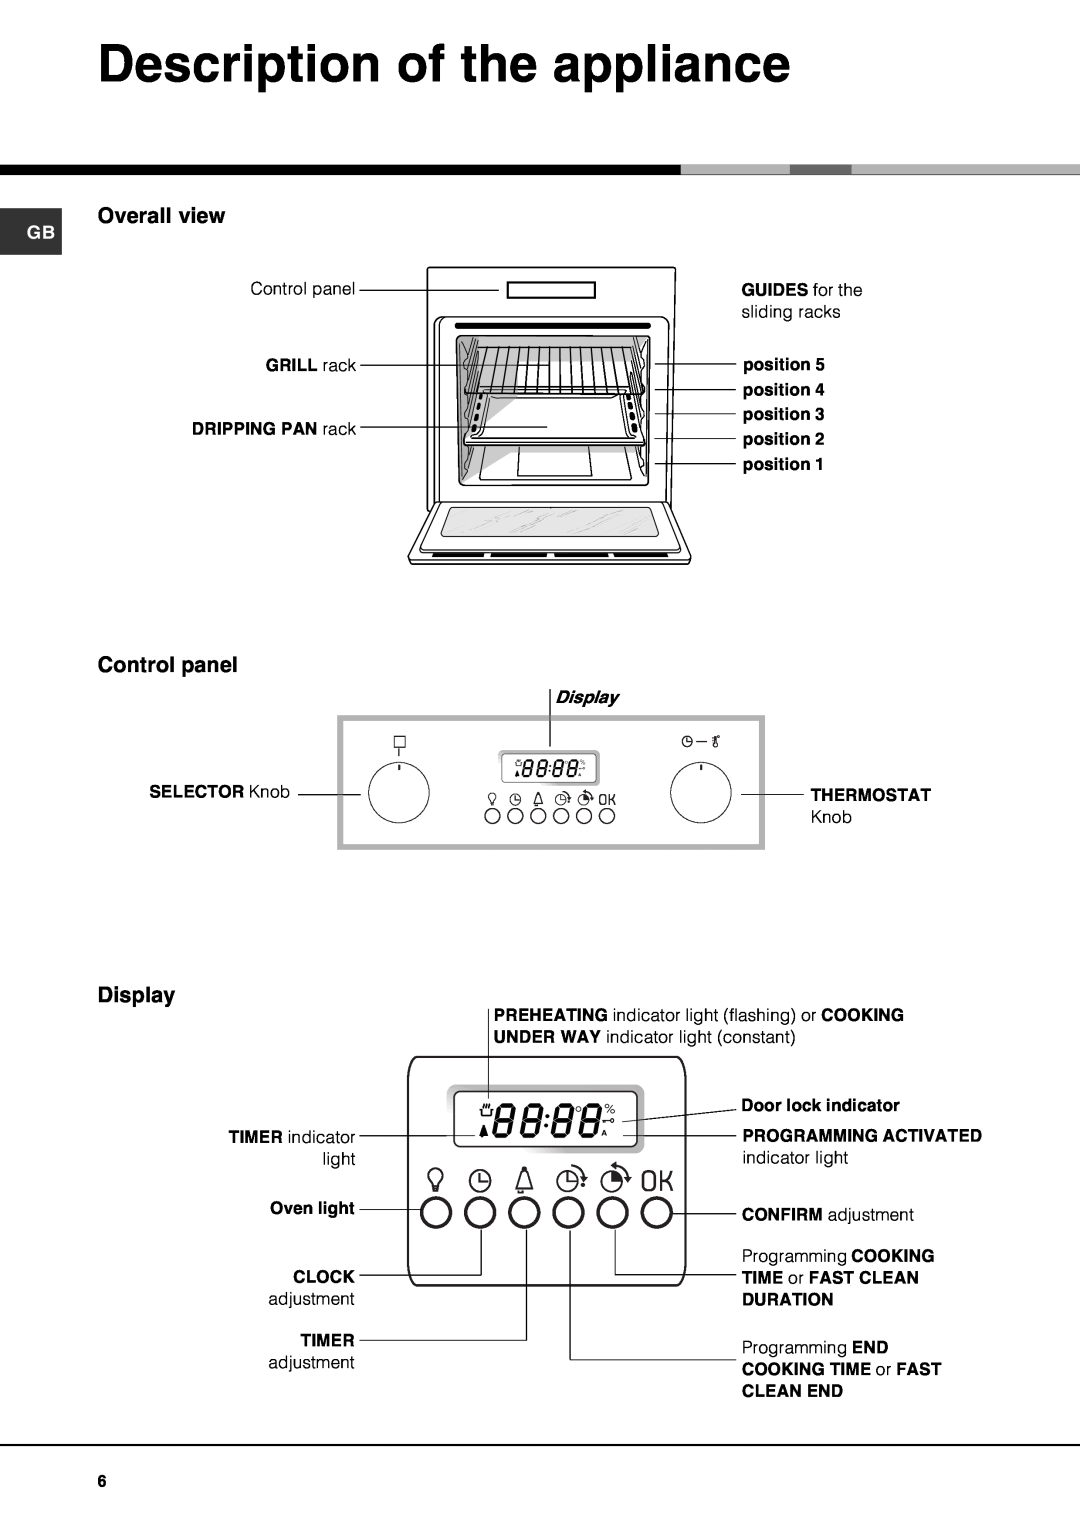 Hotpoint SE87PX manual Description of the appliance, Overall view, Control panel, Display 